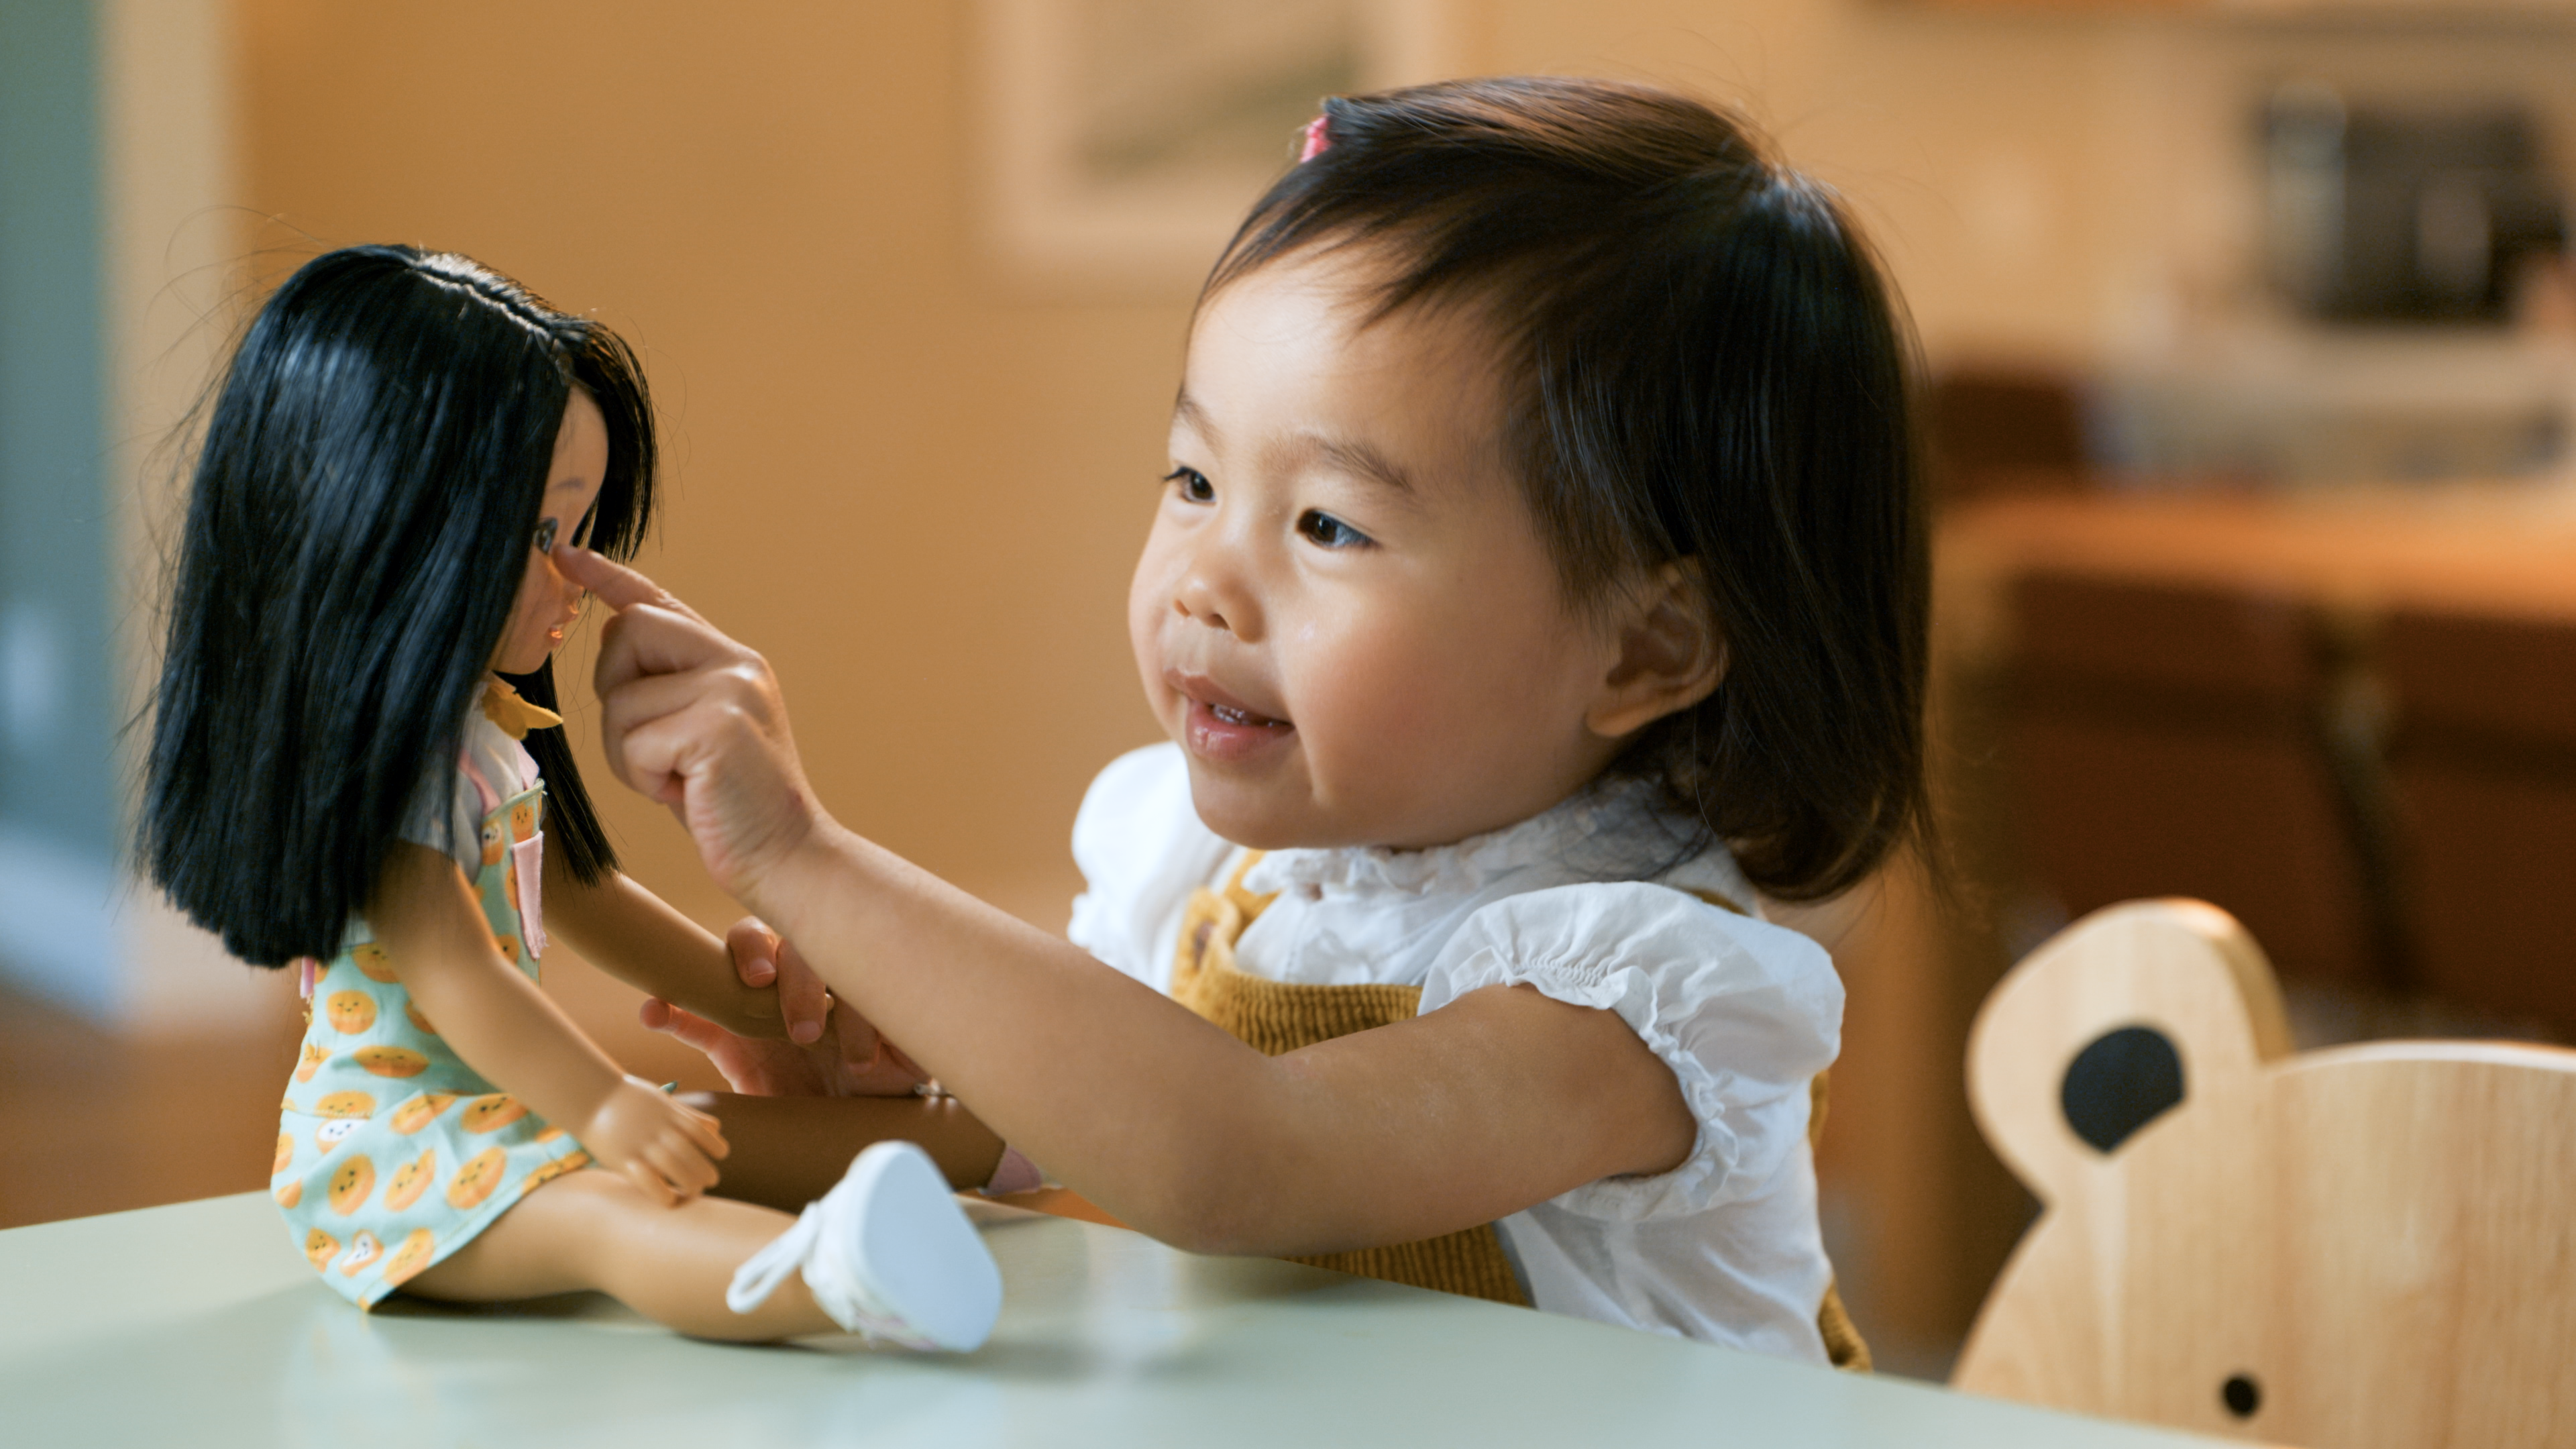 An Asian-American girl touching a doll's face